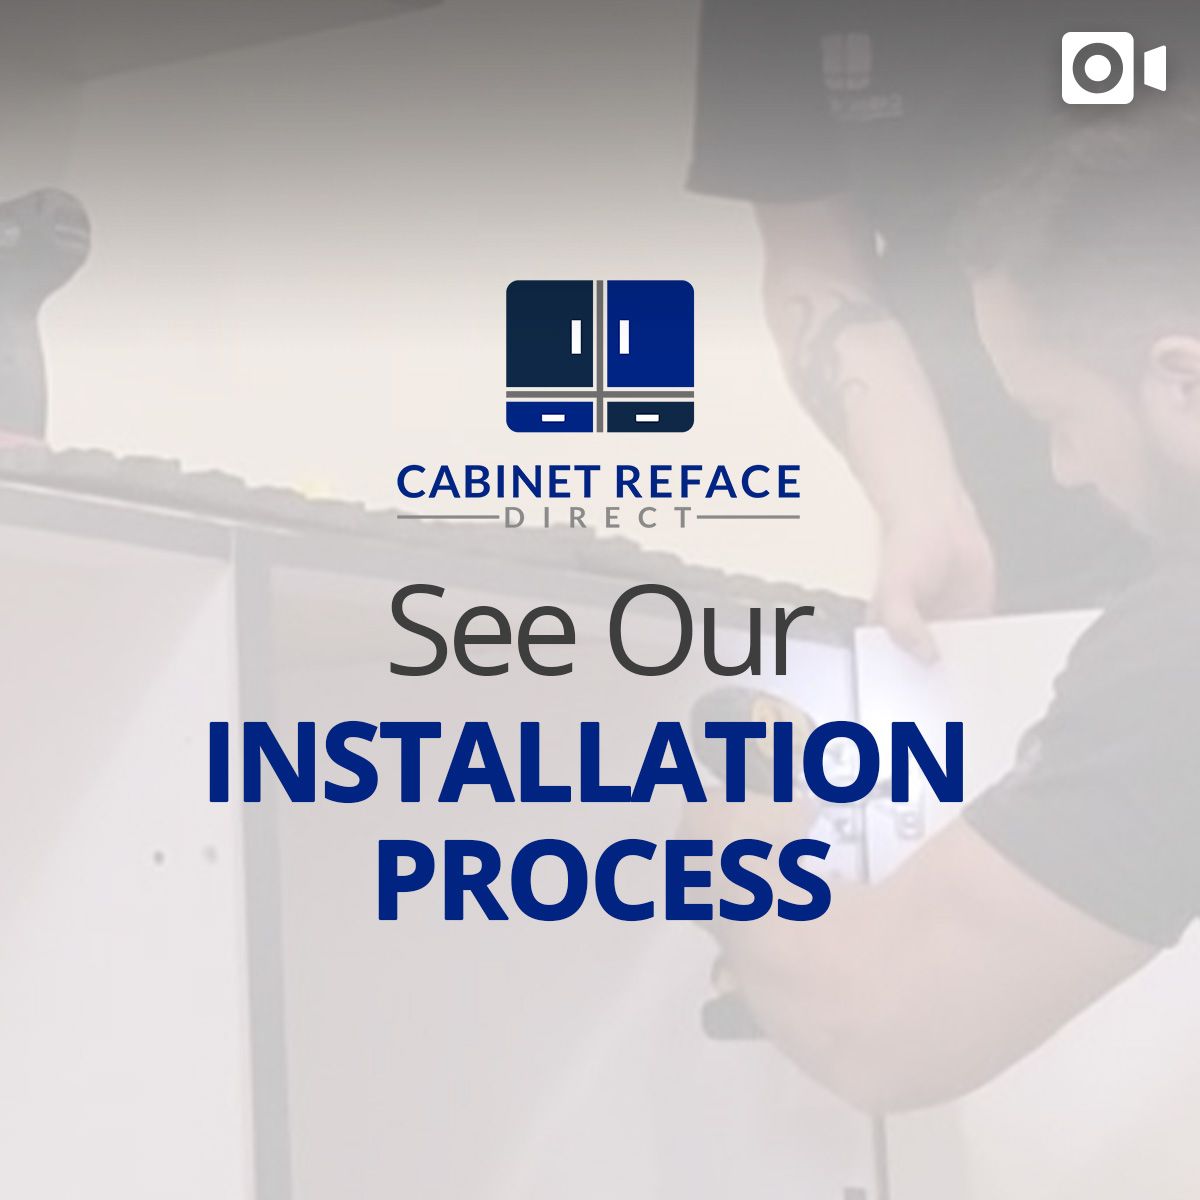 See our installation process